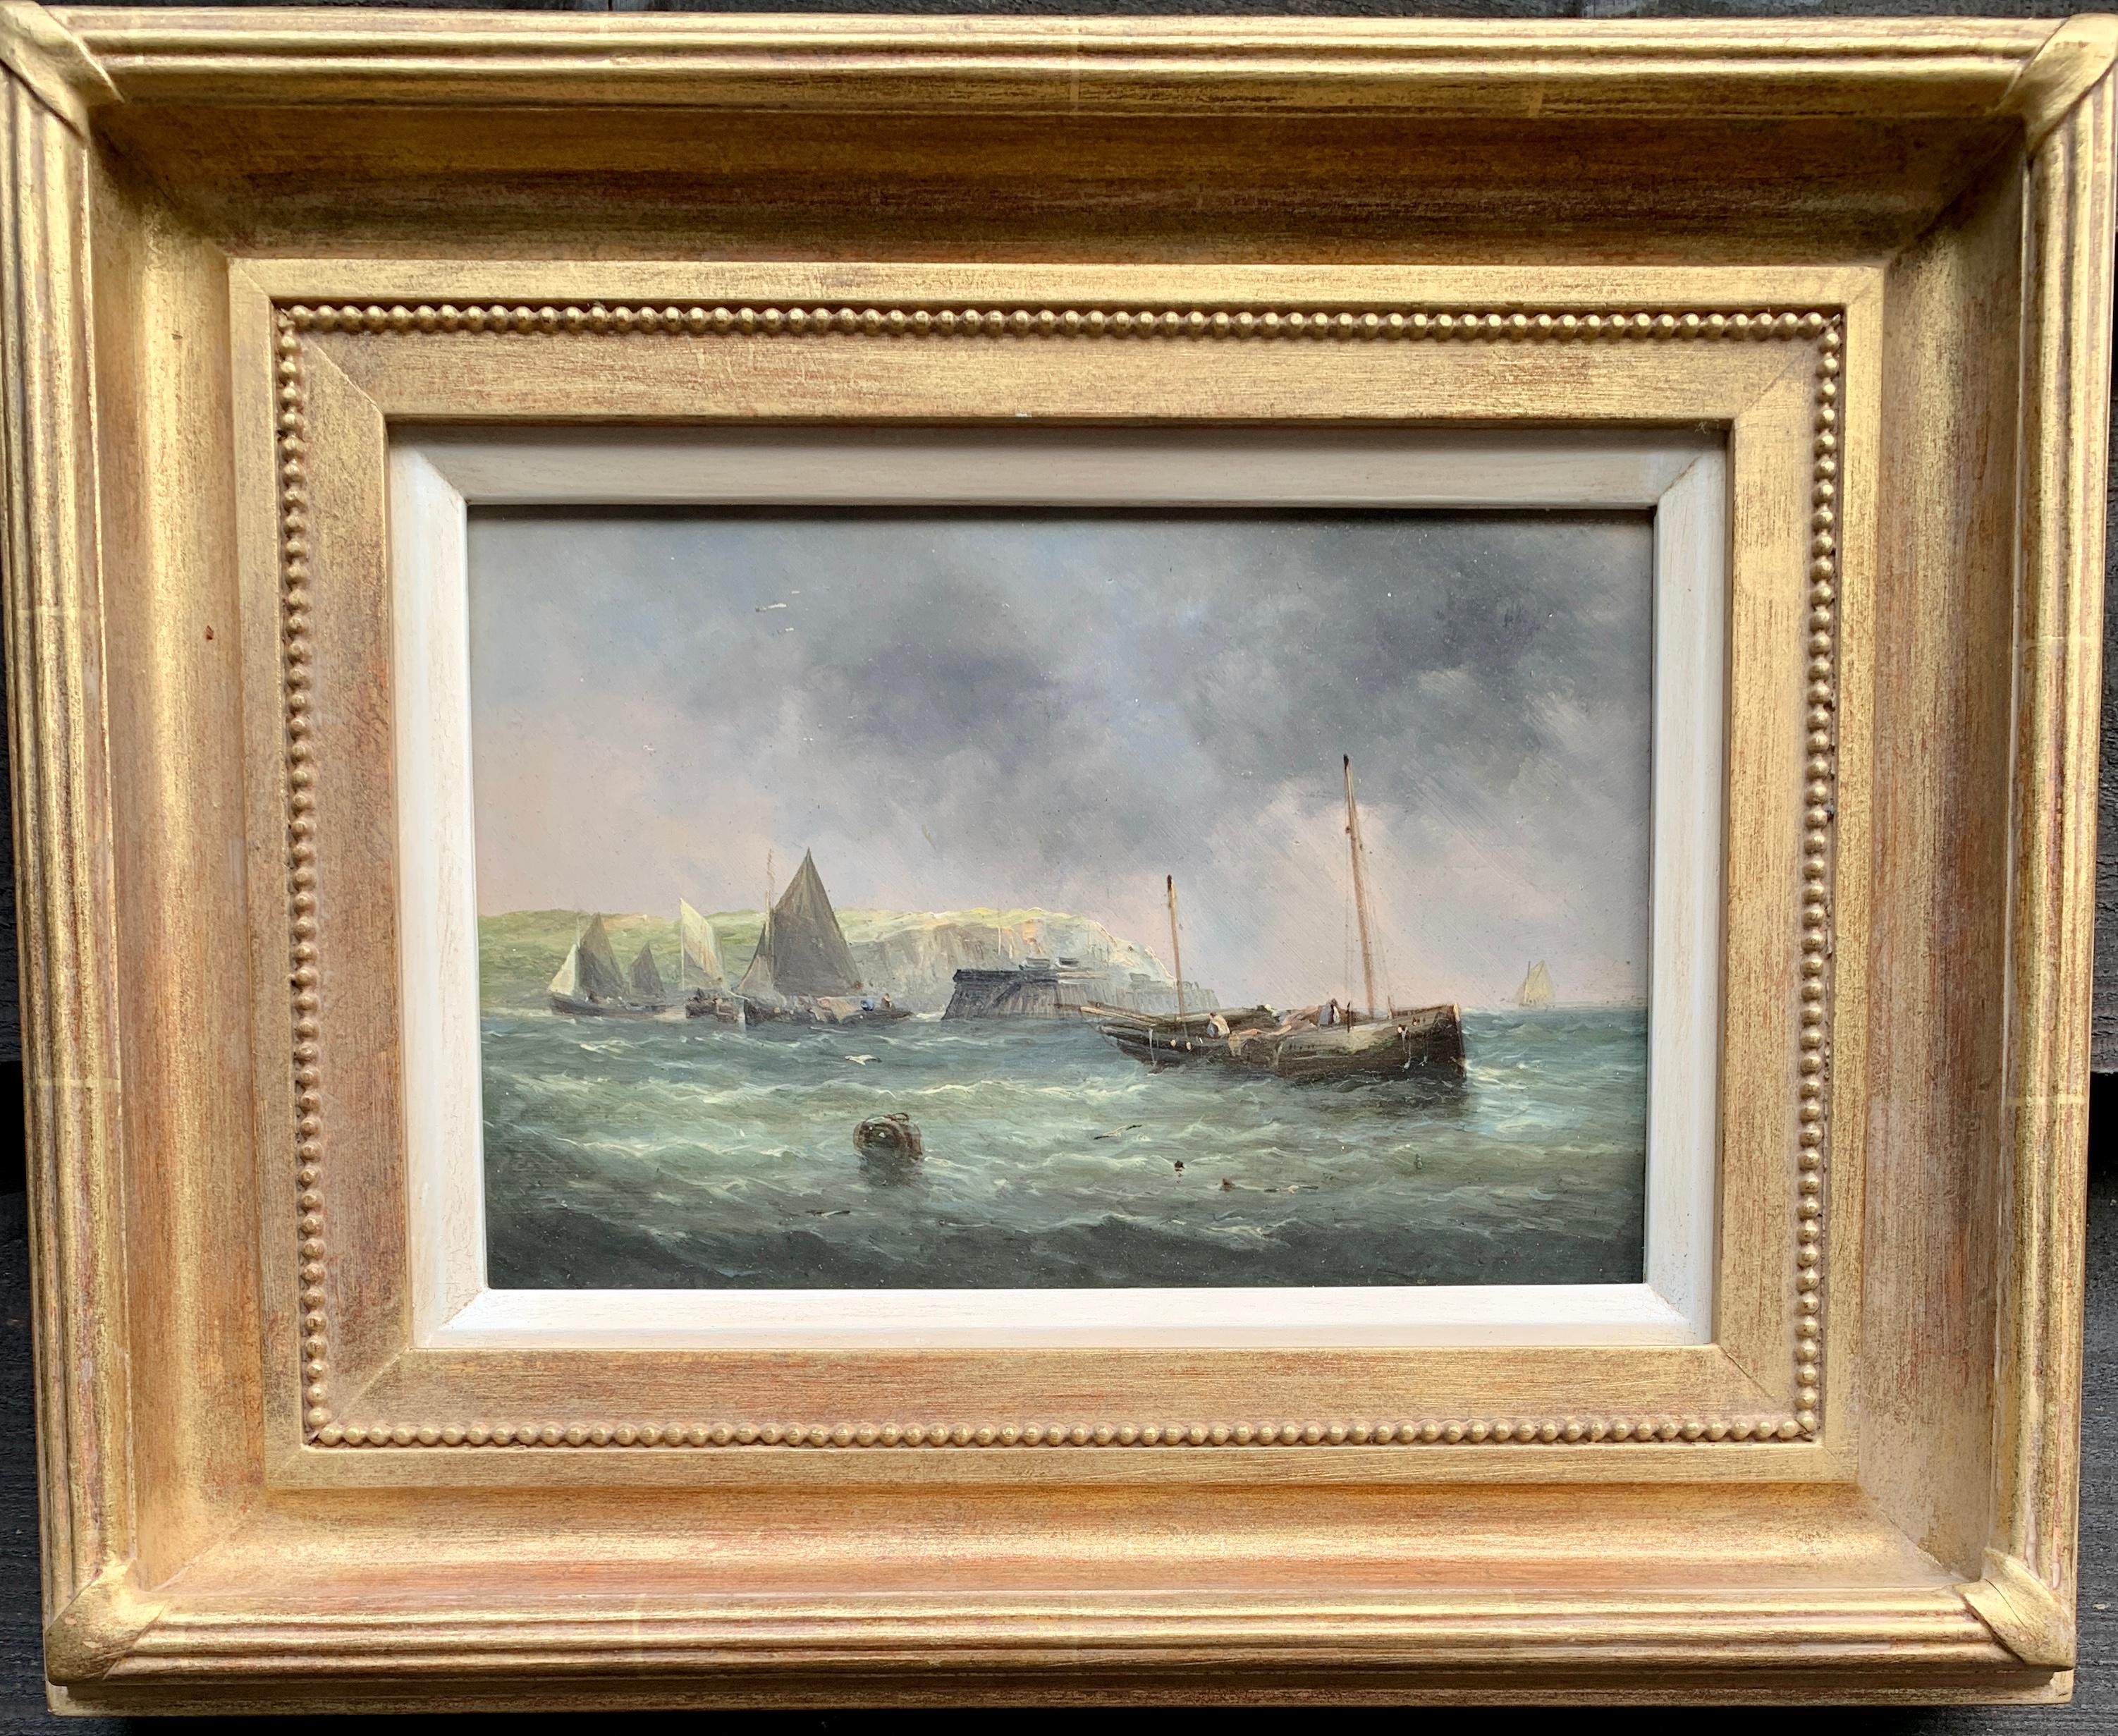 J.H.Watson Figurative Painting - 19th century antique English fishing boats by the White Cliffs of Dover